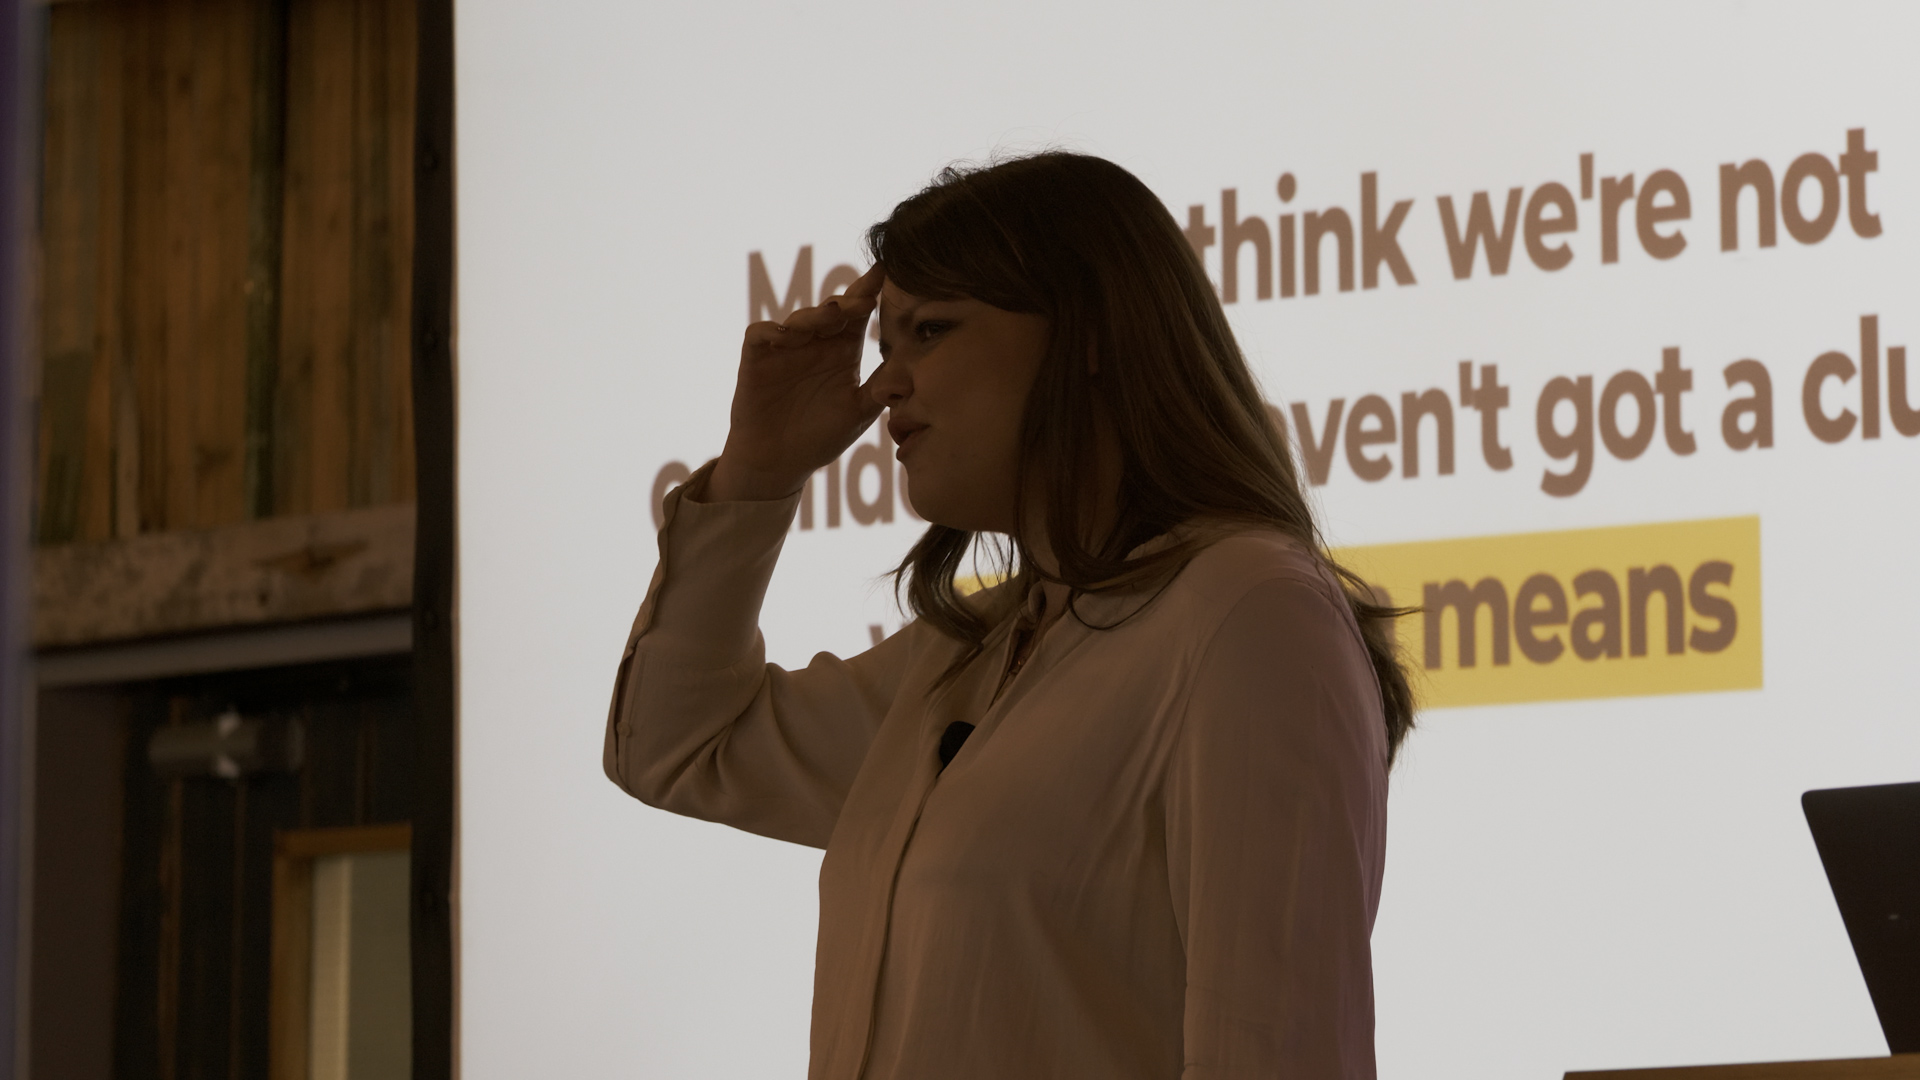 How to increase confidence, take risks and get more done [Video] Kirsty Hulse - LOVE INBOUND 2022